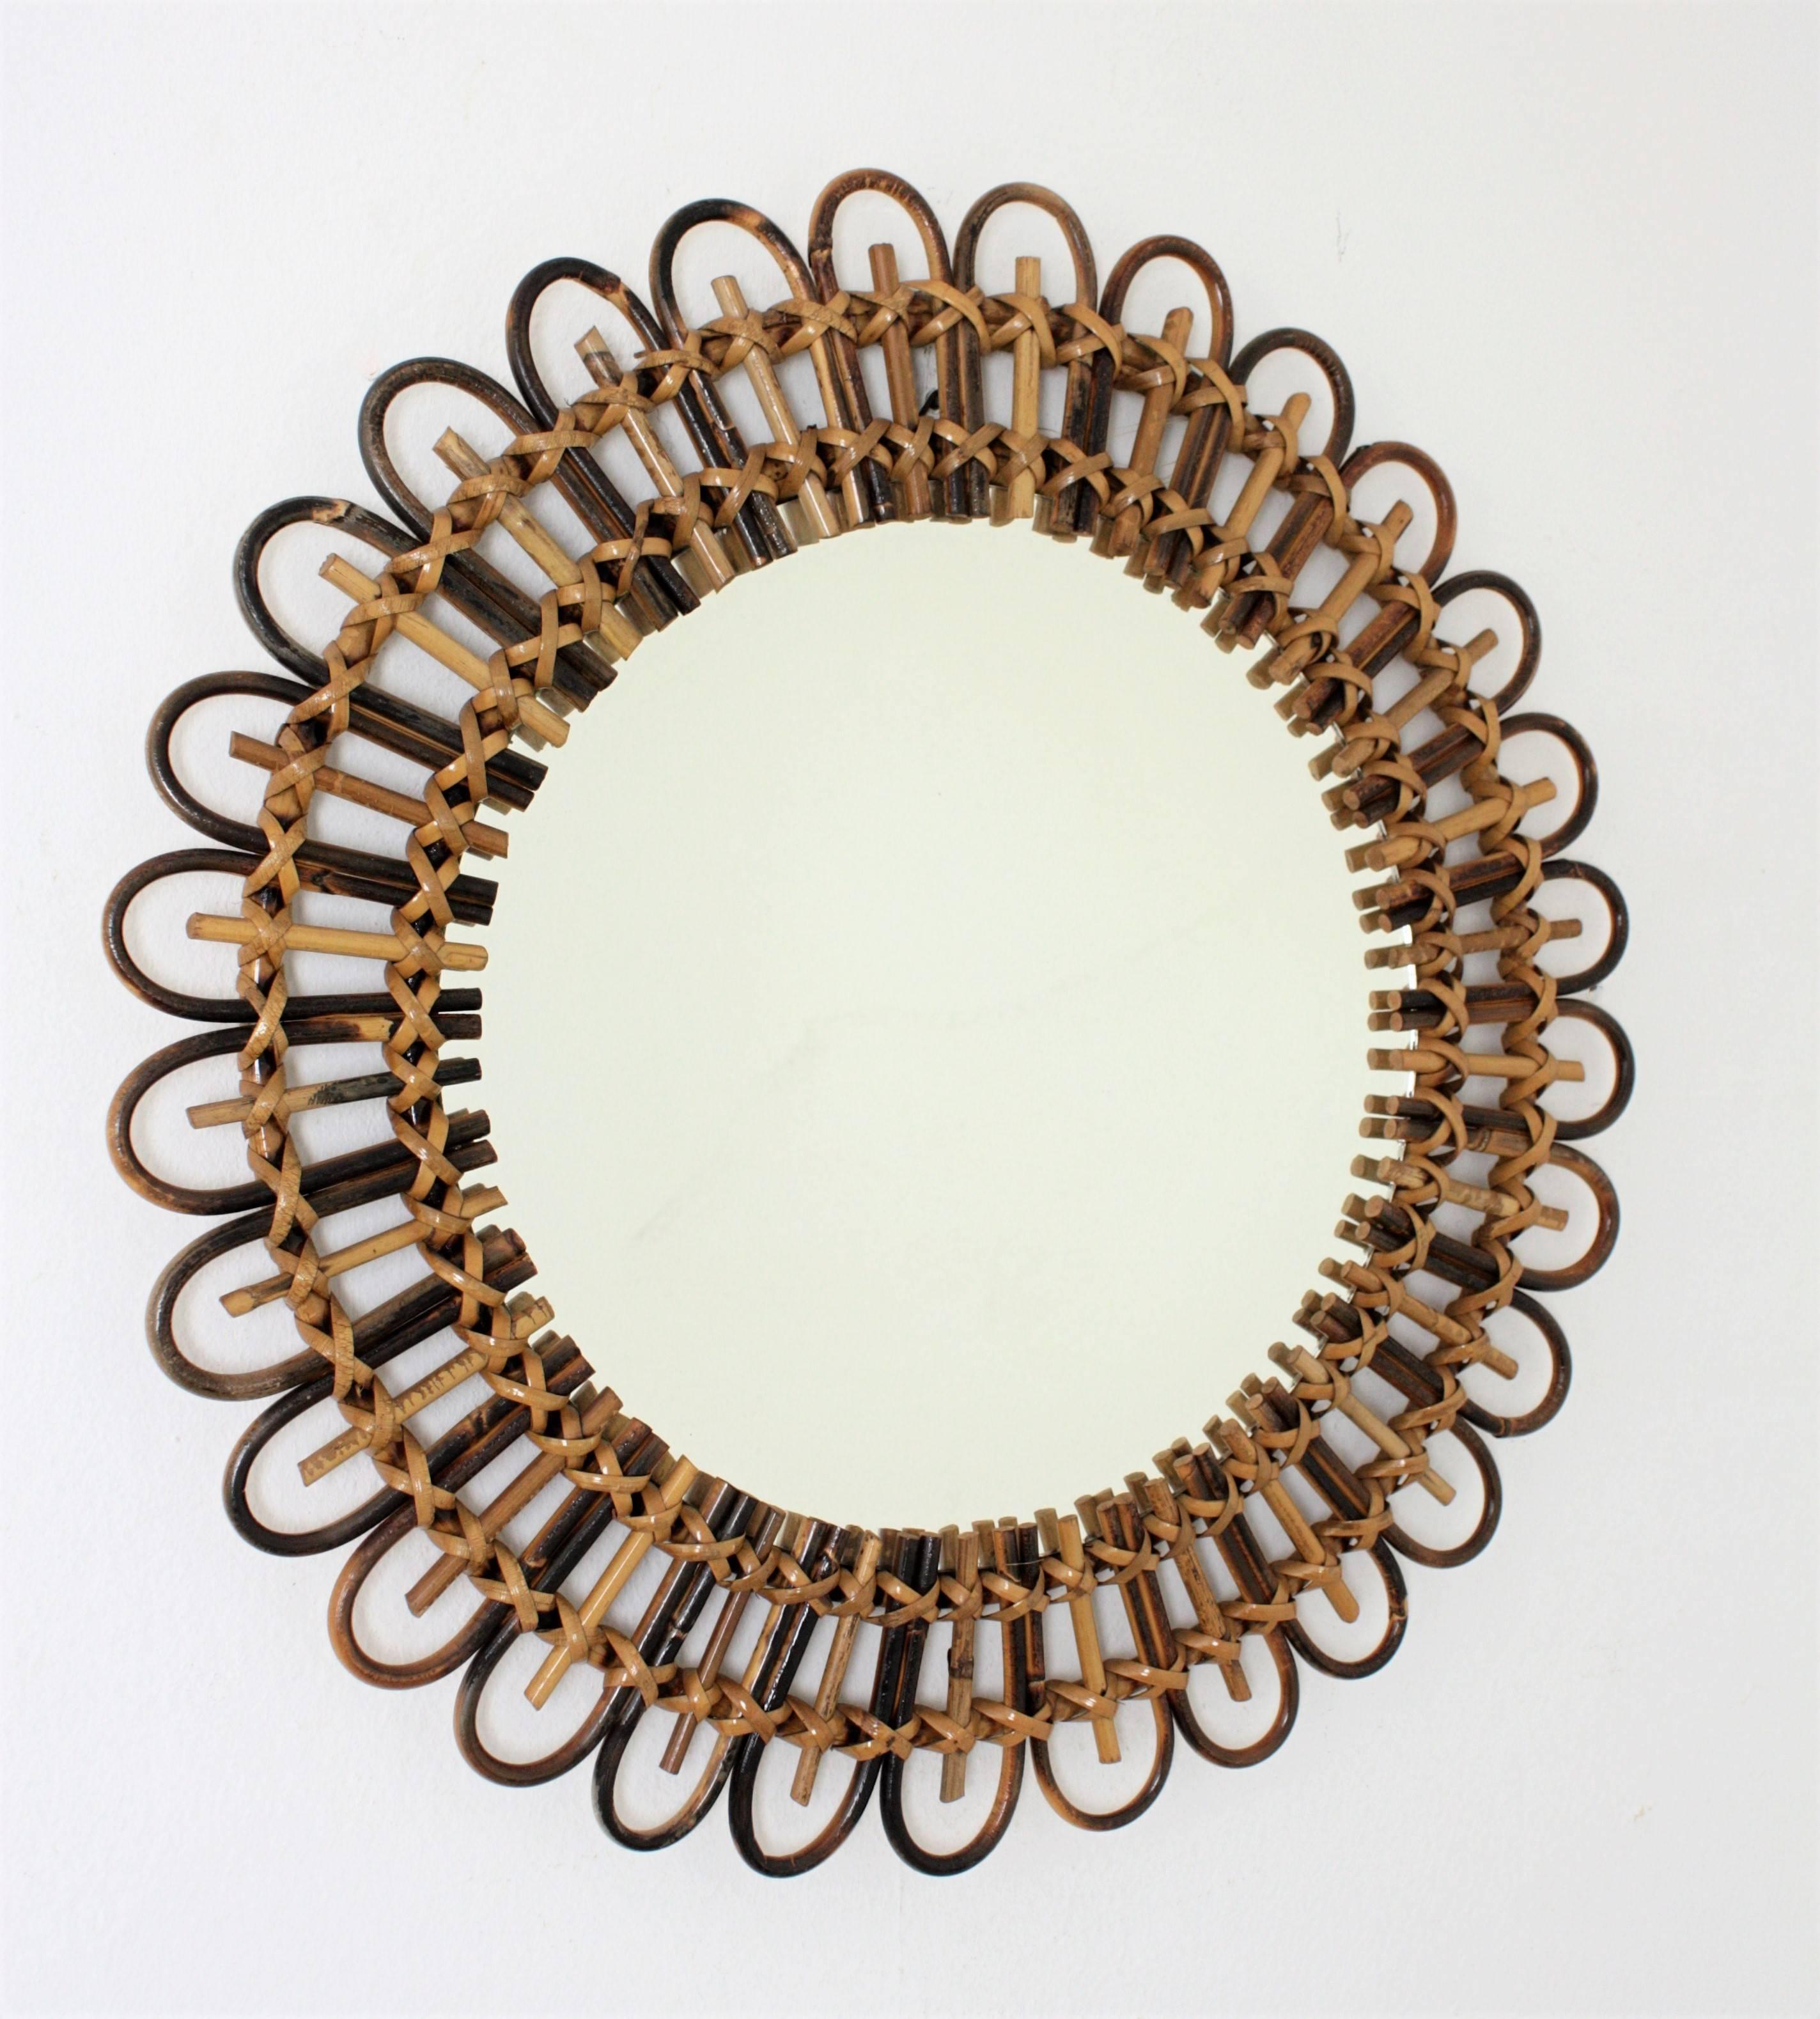 Beautiful French handcrafted rattan and bamboo flower burst mirror. This lovely mirror has alternating petals in two different colors that highlight its beauty. Lovely to place it alone or creating a wall decoration with other rattan or bamboo